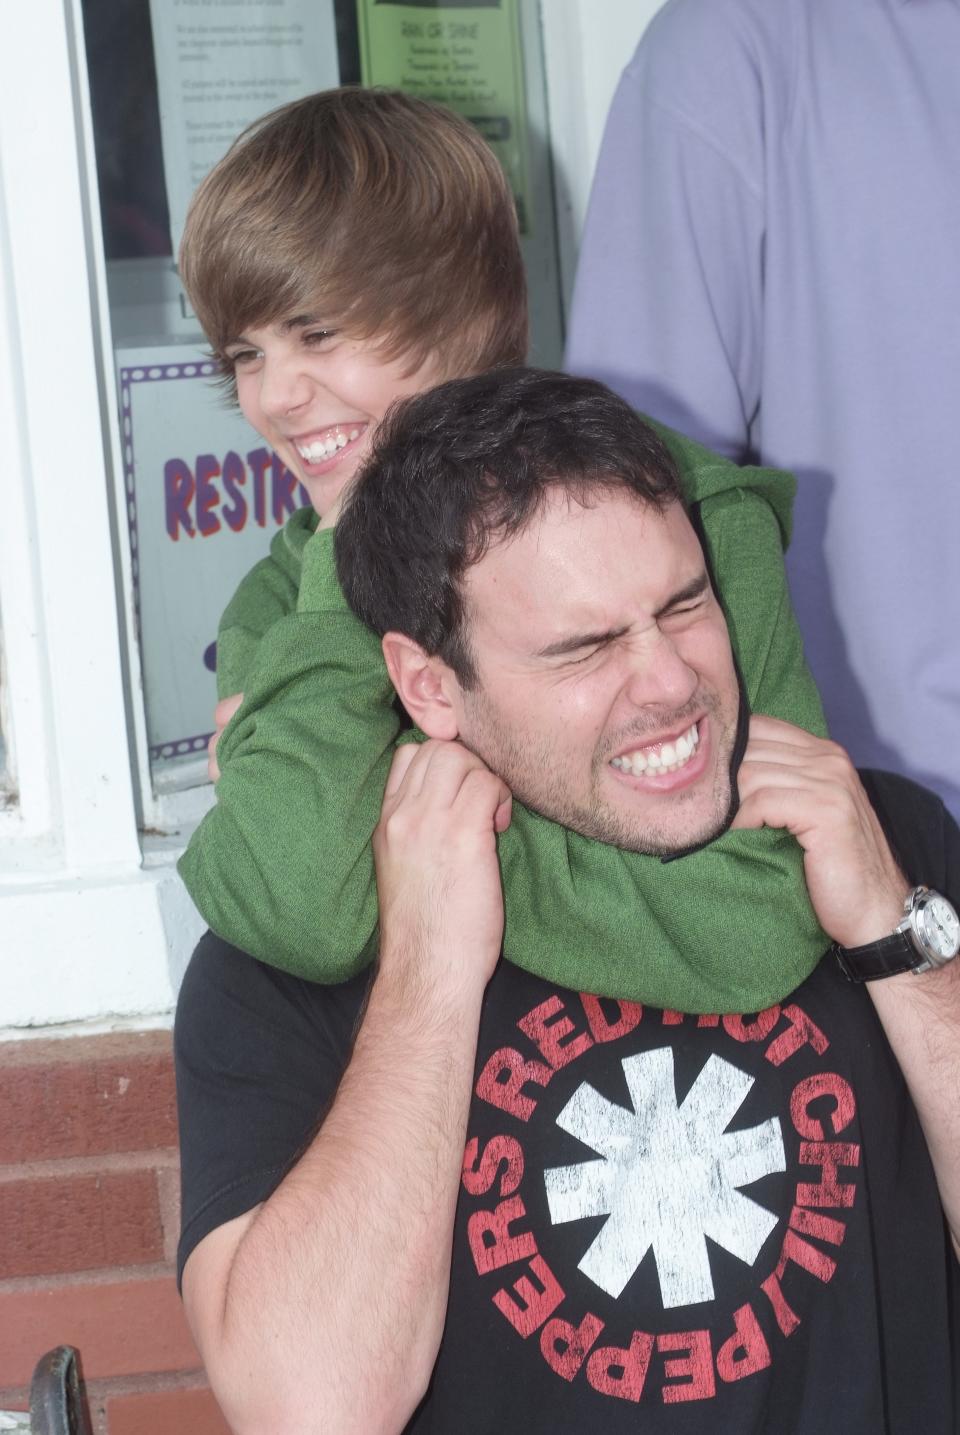 Justin Bieber and Scooter Braun on the set of the music video for “One Less Lonely Girl” in 2009.